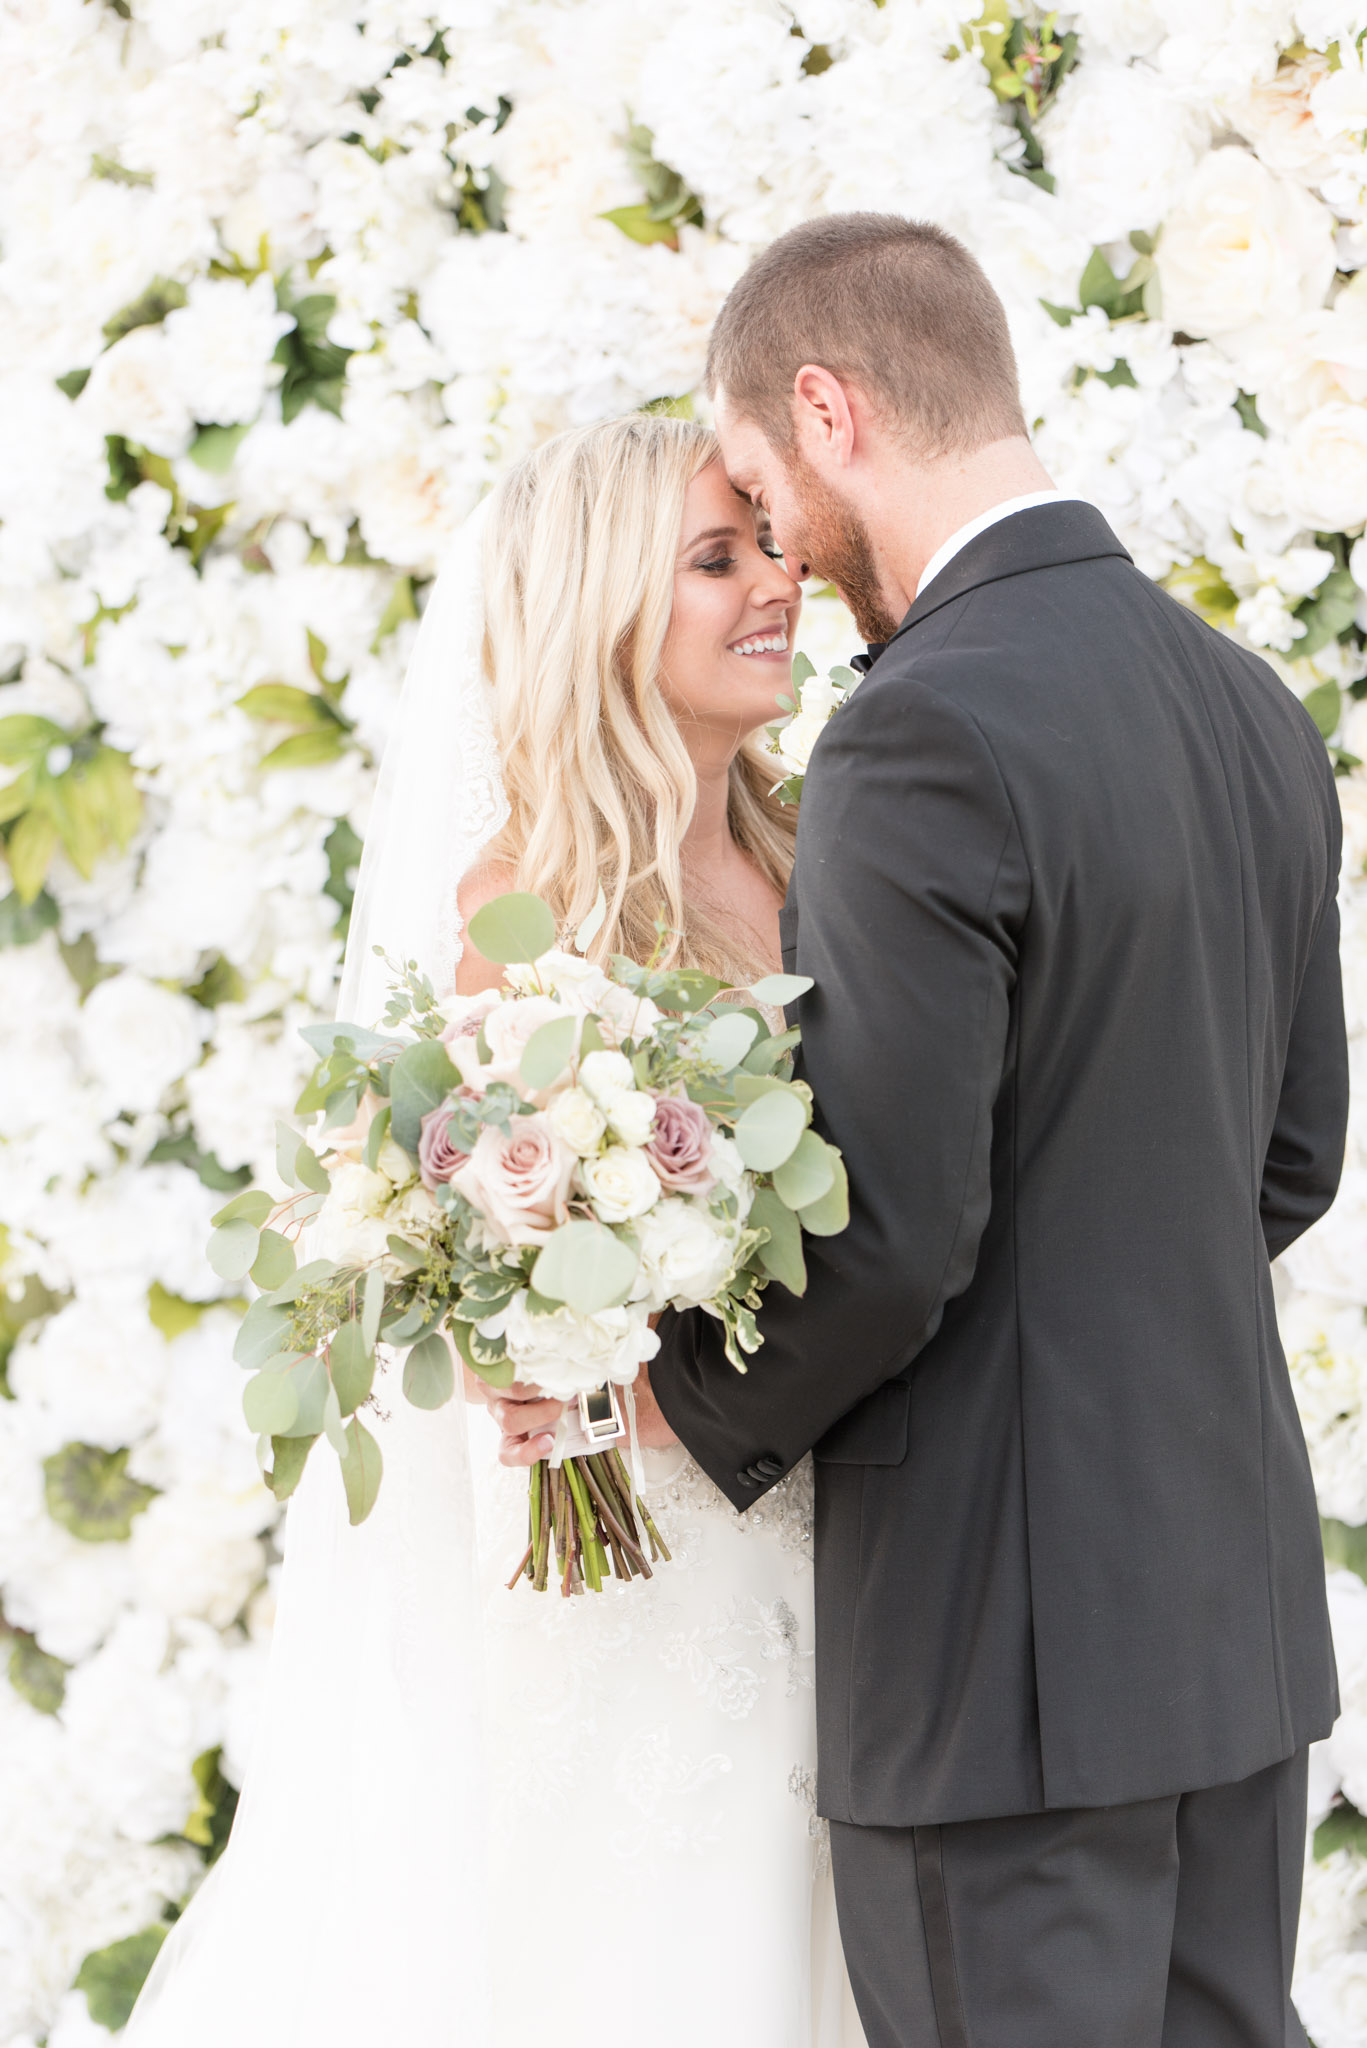 Bride and groom cuddle in front of flower wall.